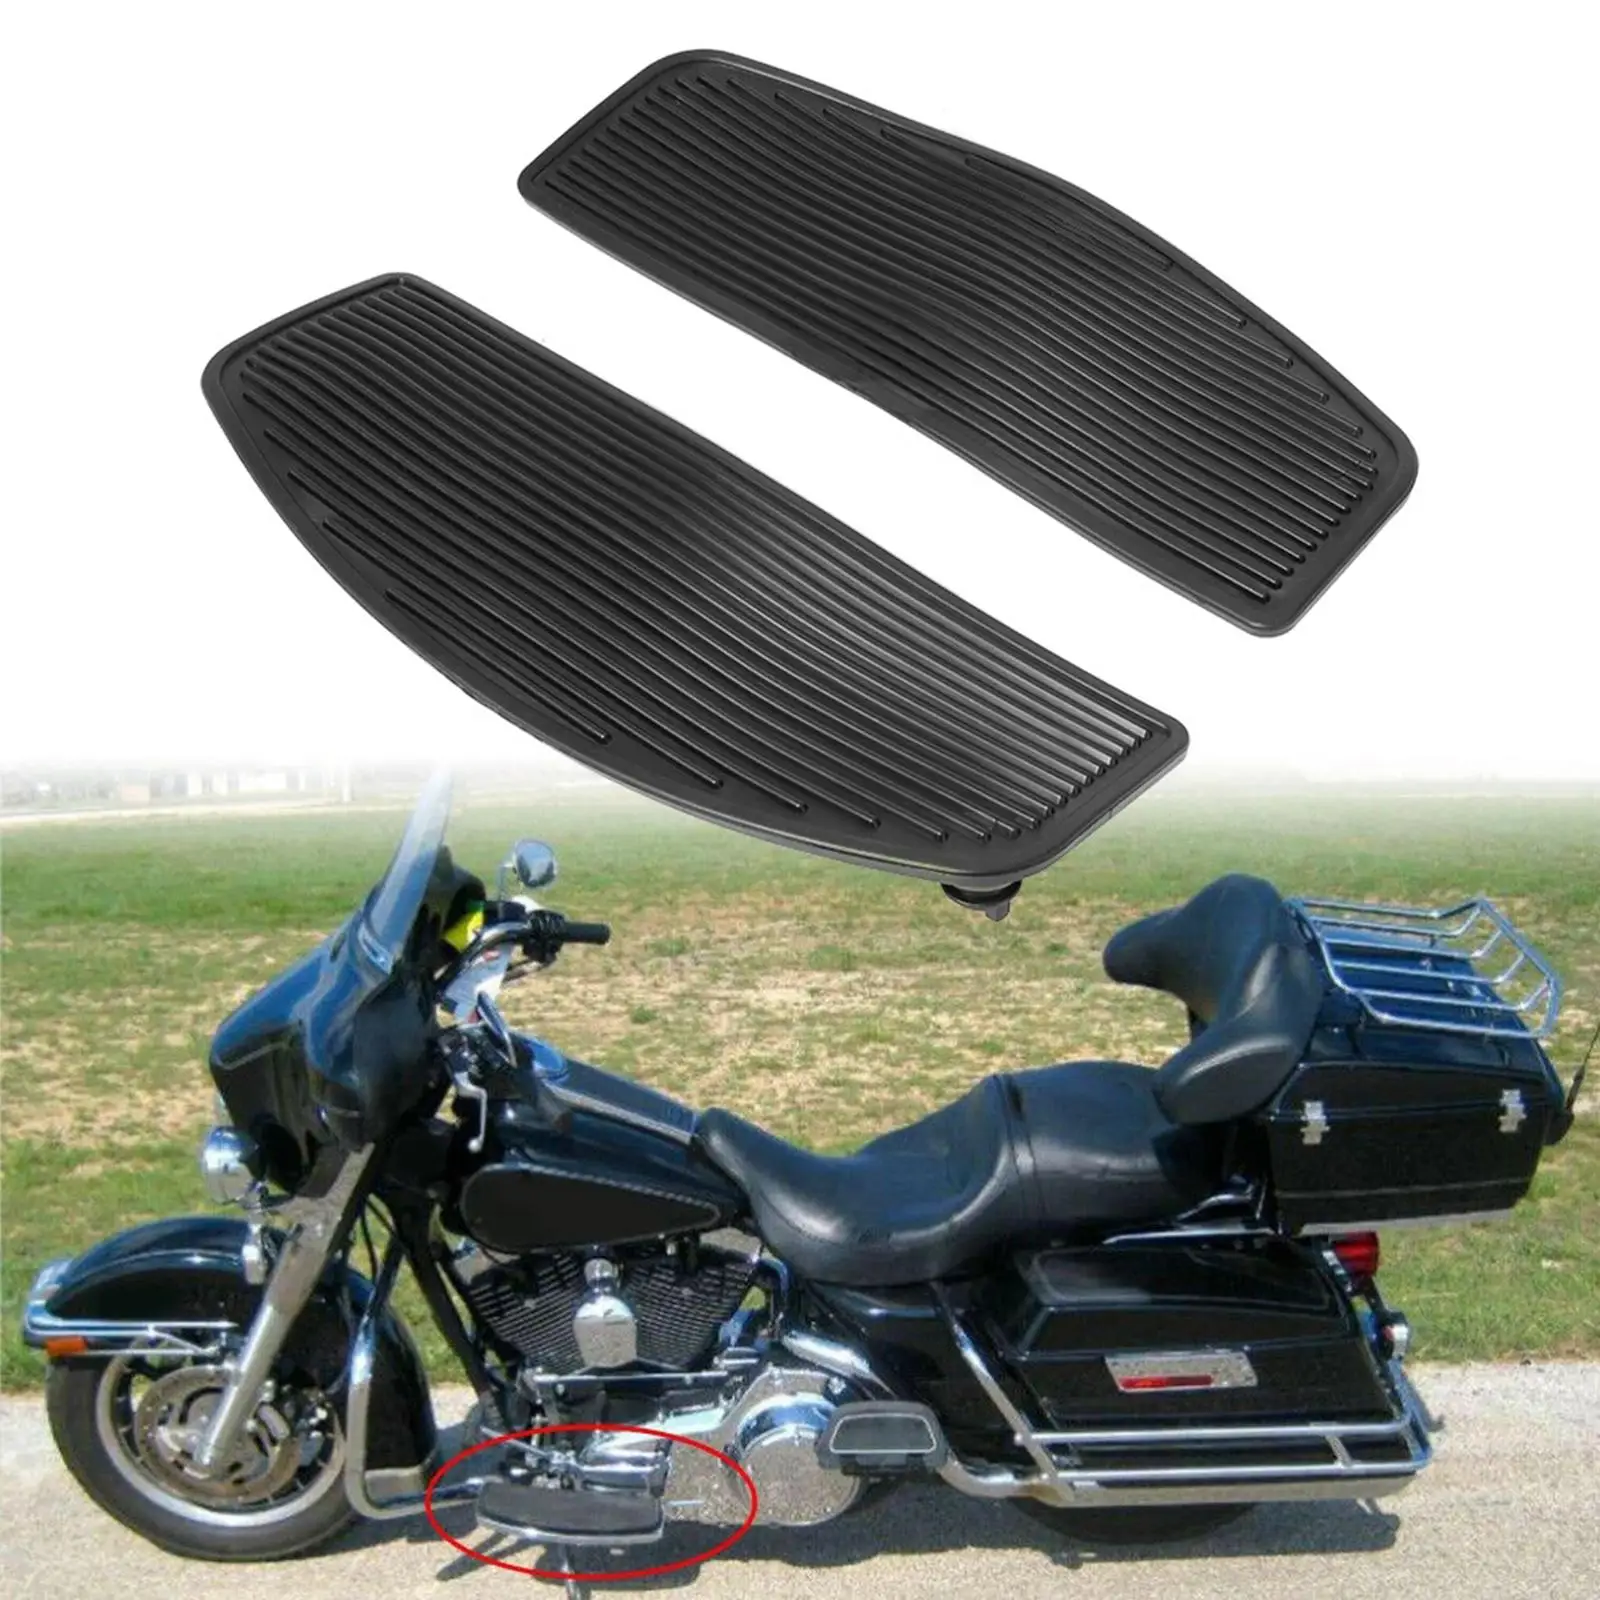 Motorcycle Pedals  Direct Replaces Footrest Pad High Performance Easy to Install Professional Durable Floorboards 